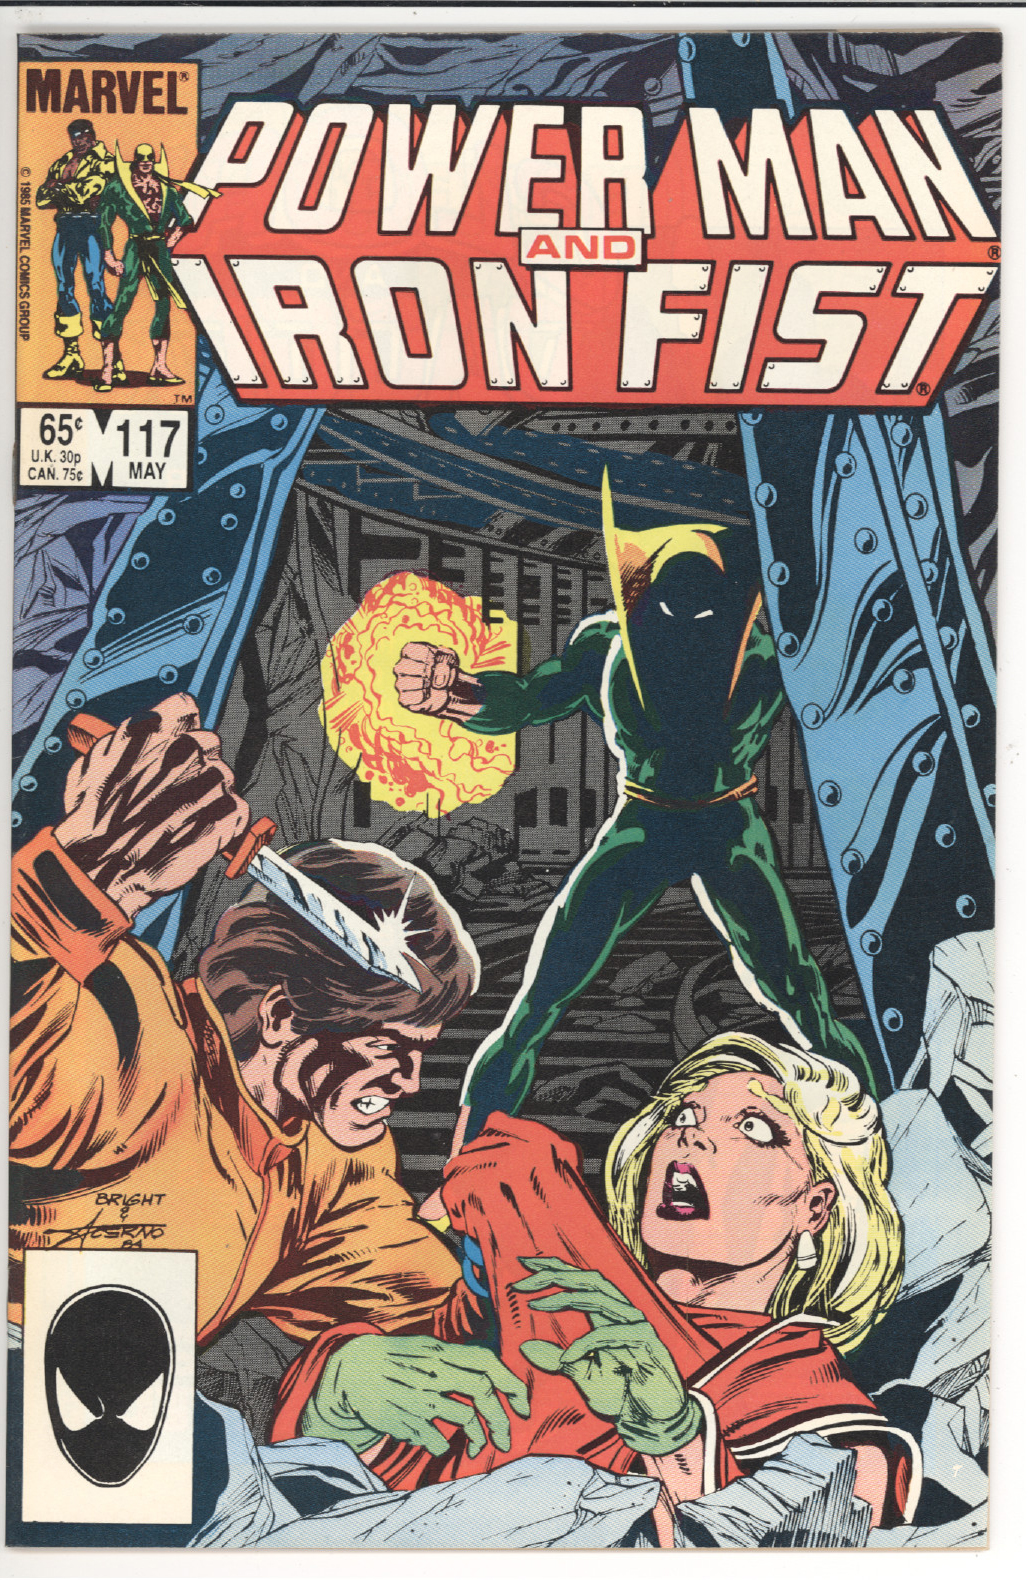 Power Man and Iron Fist #117 front